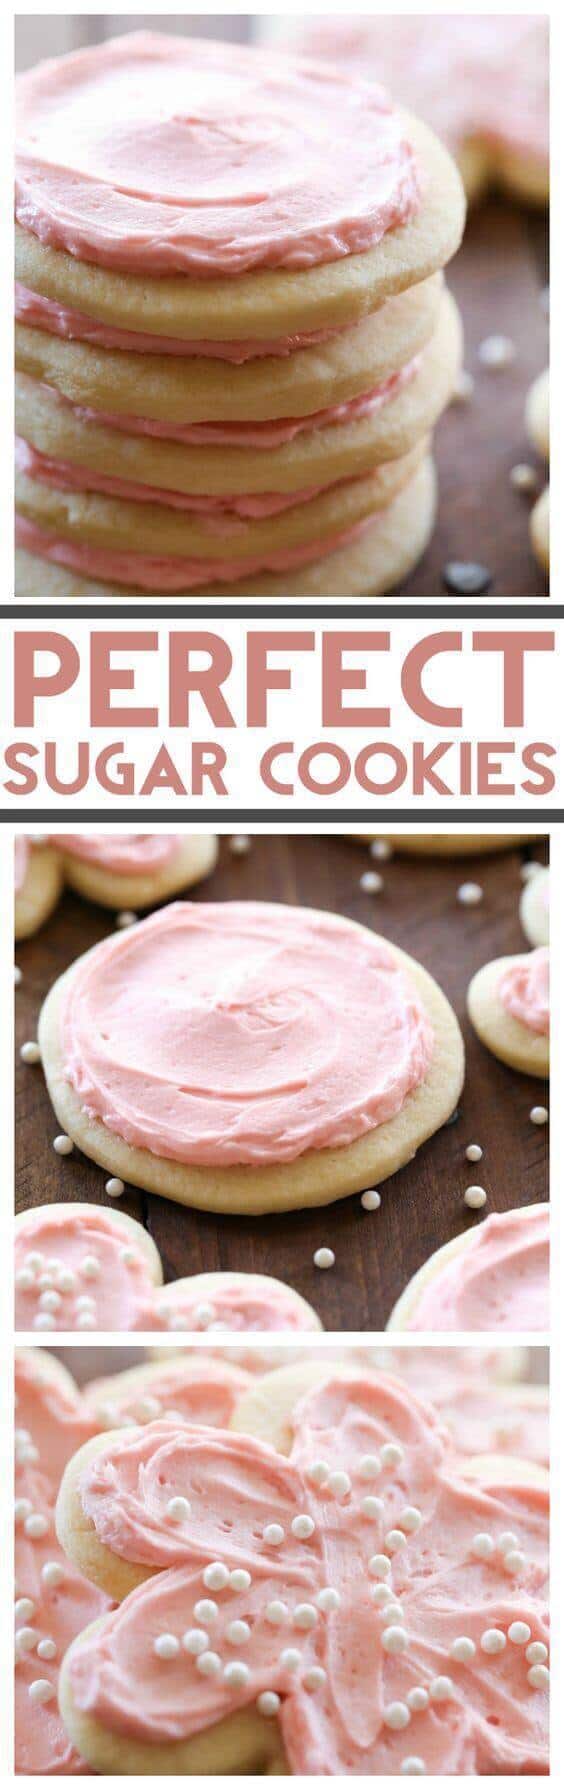 Perfect Sugar Cookies - The Best Blog Recipes